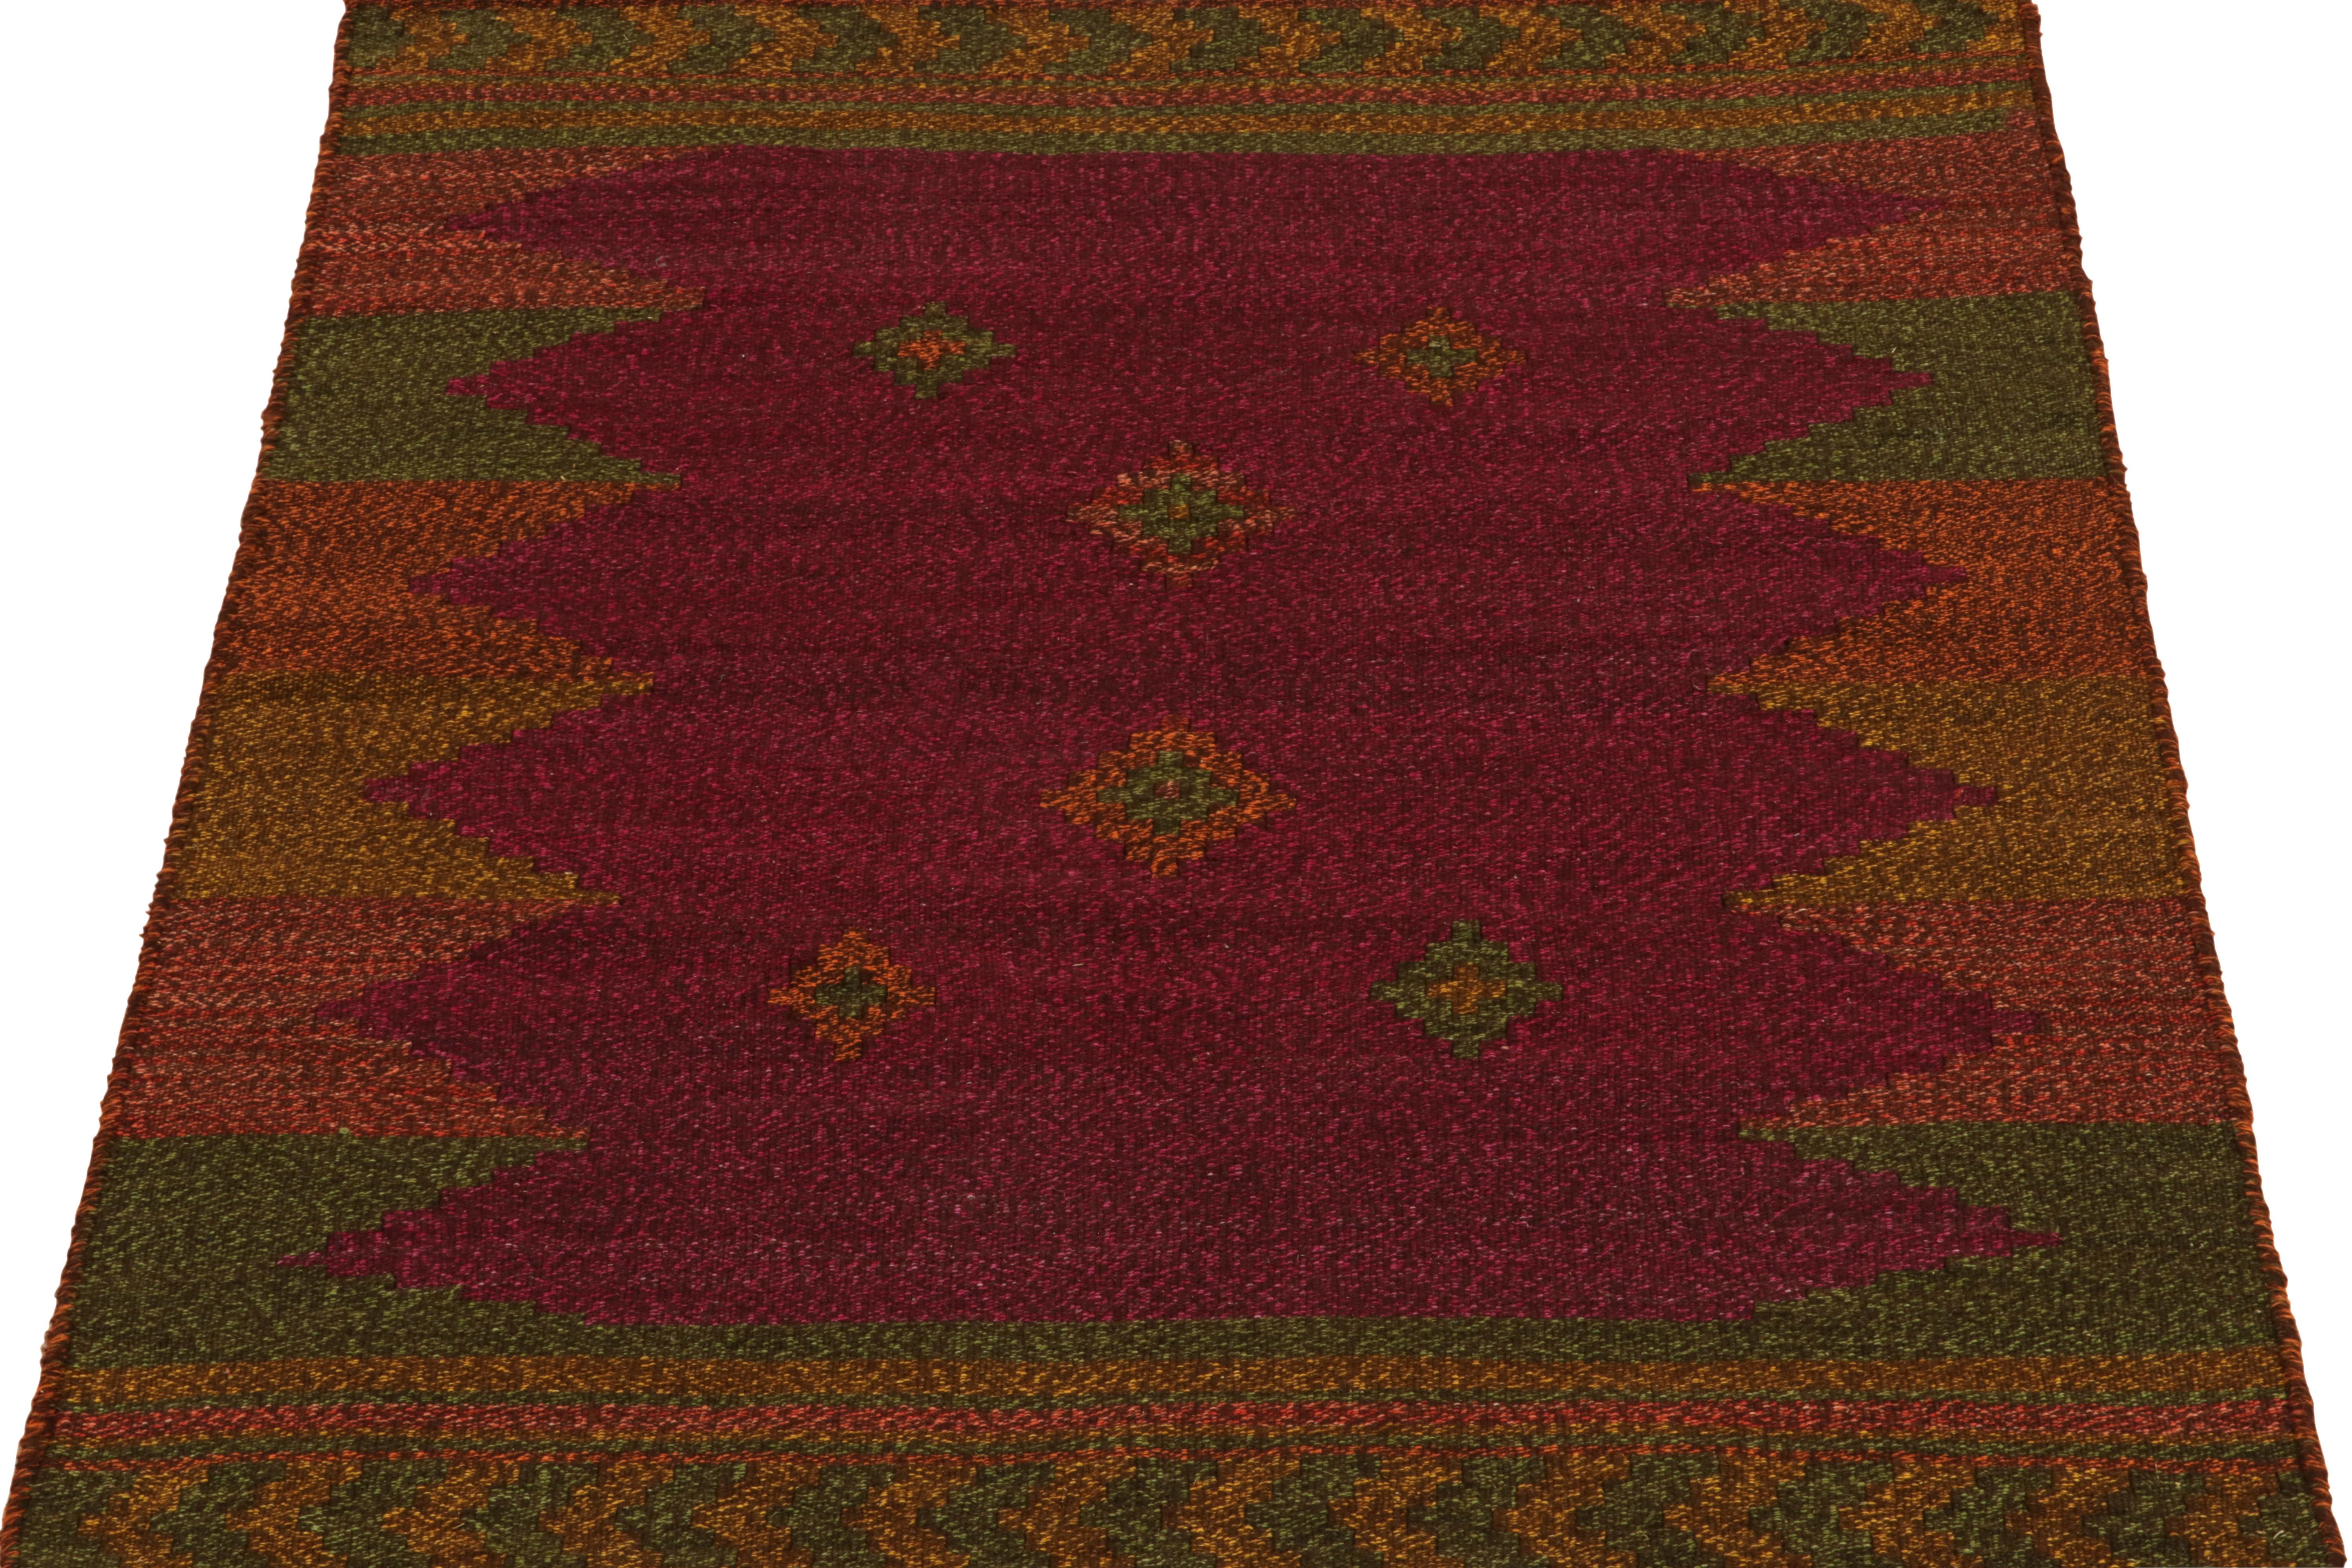 Handwoven in wool circa 1980-1990, from a rare vintage curation of small-sized Kilim rugs new to our classic collections. Called Sofreh rugs, distinguished among Persian flat weaves for their color and durability alike.

This 3x5 piece carries a